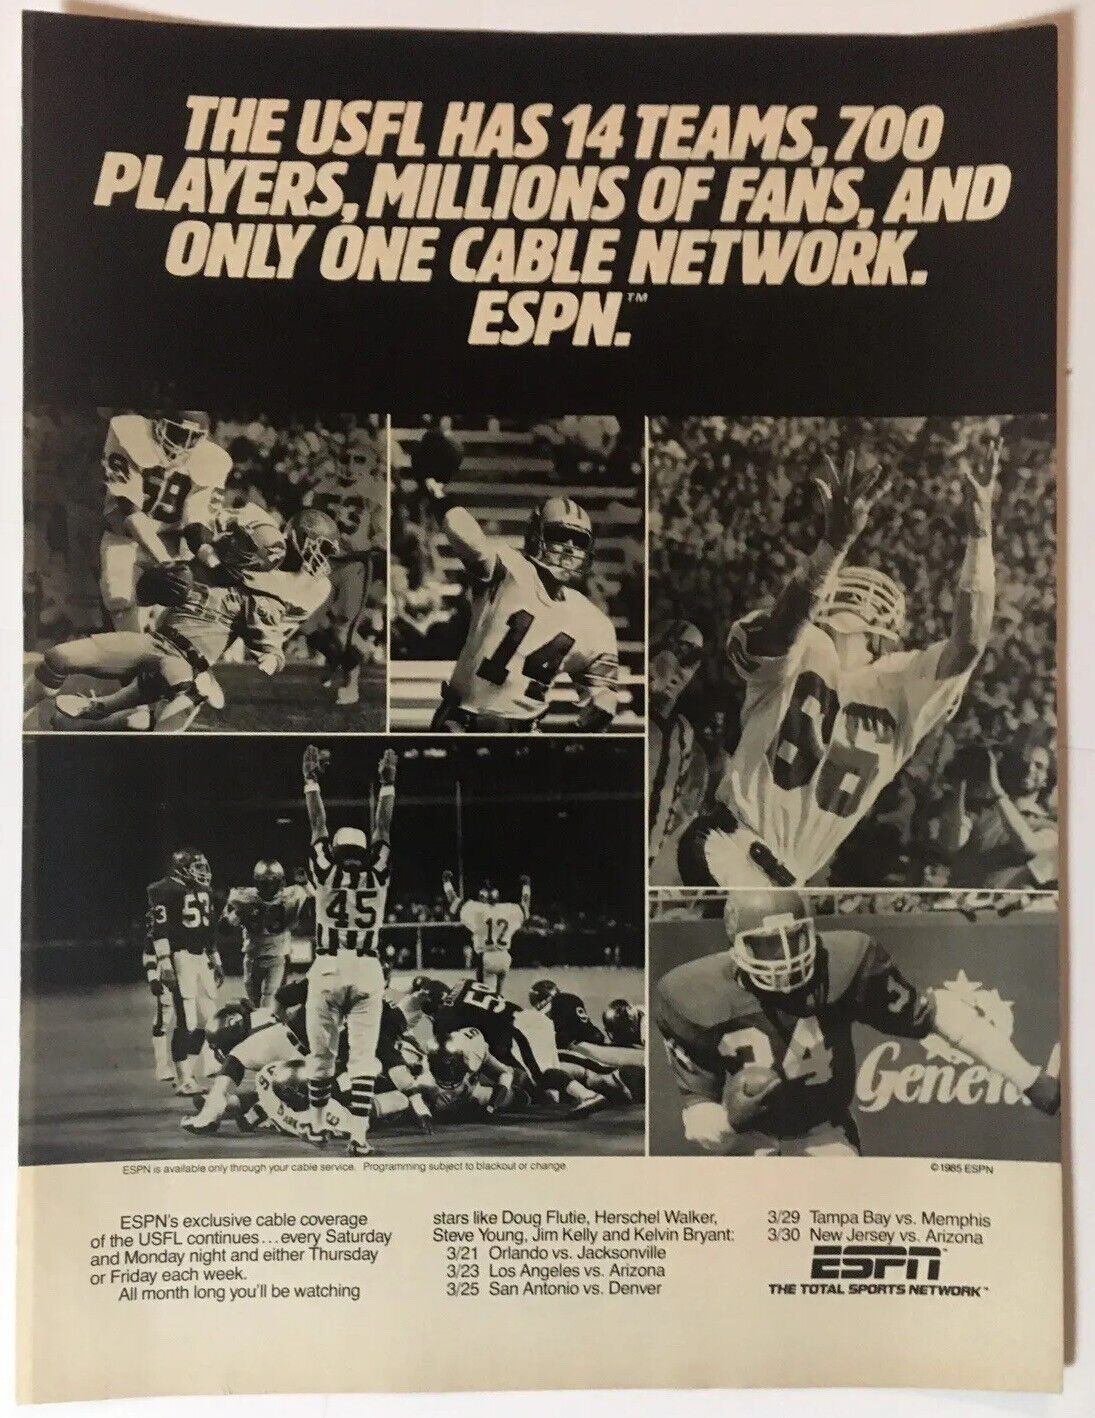 United States Football League USFL 1985 Vintage Print Ad 8x11 Inches Wall Decor